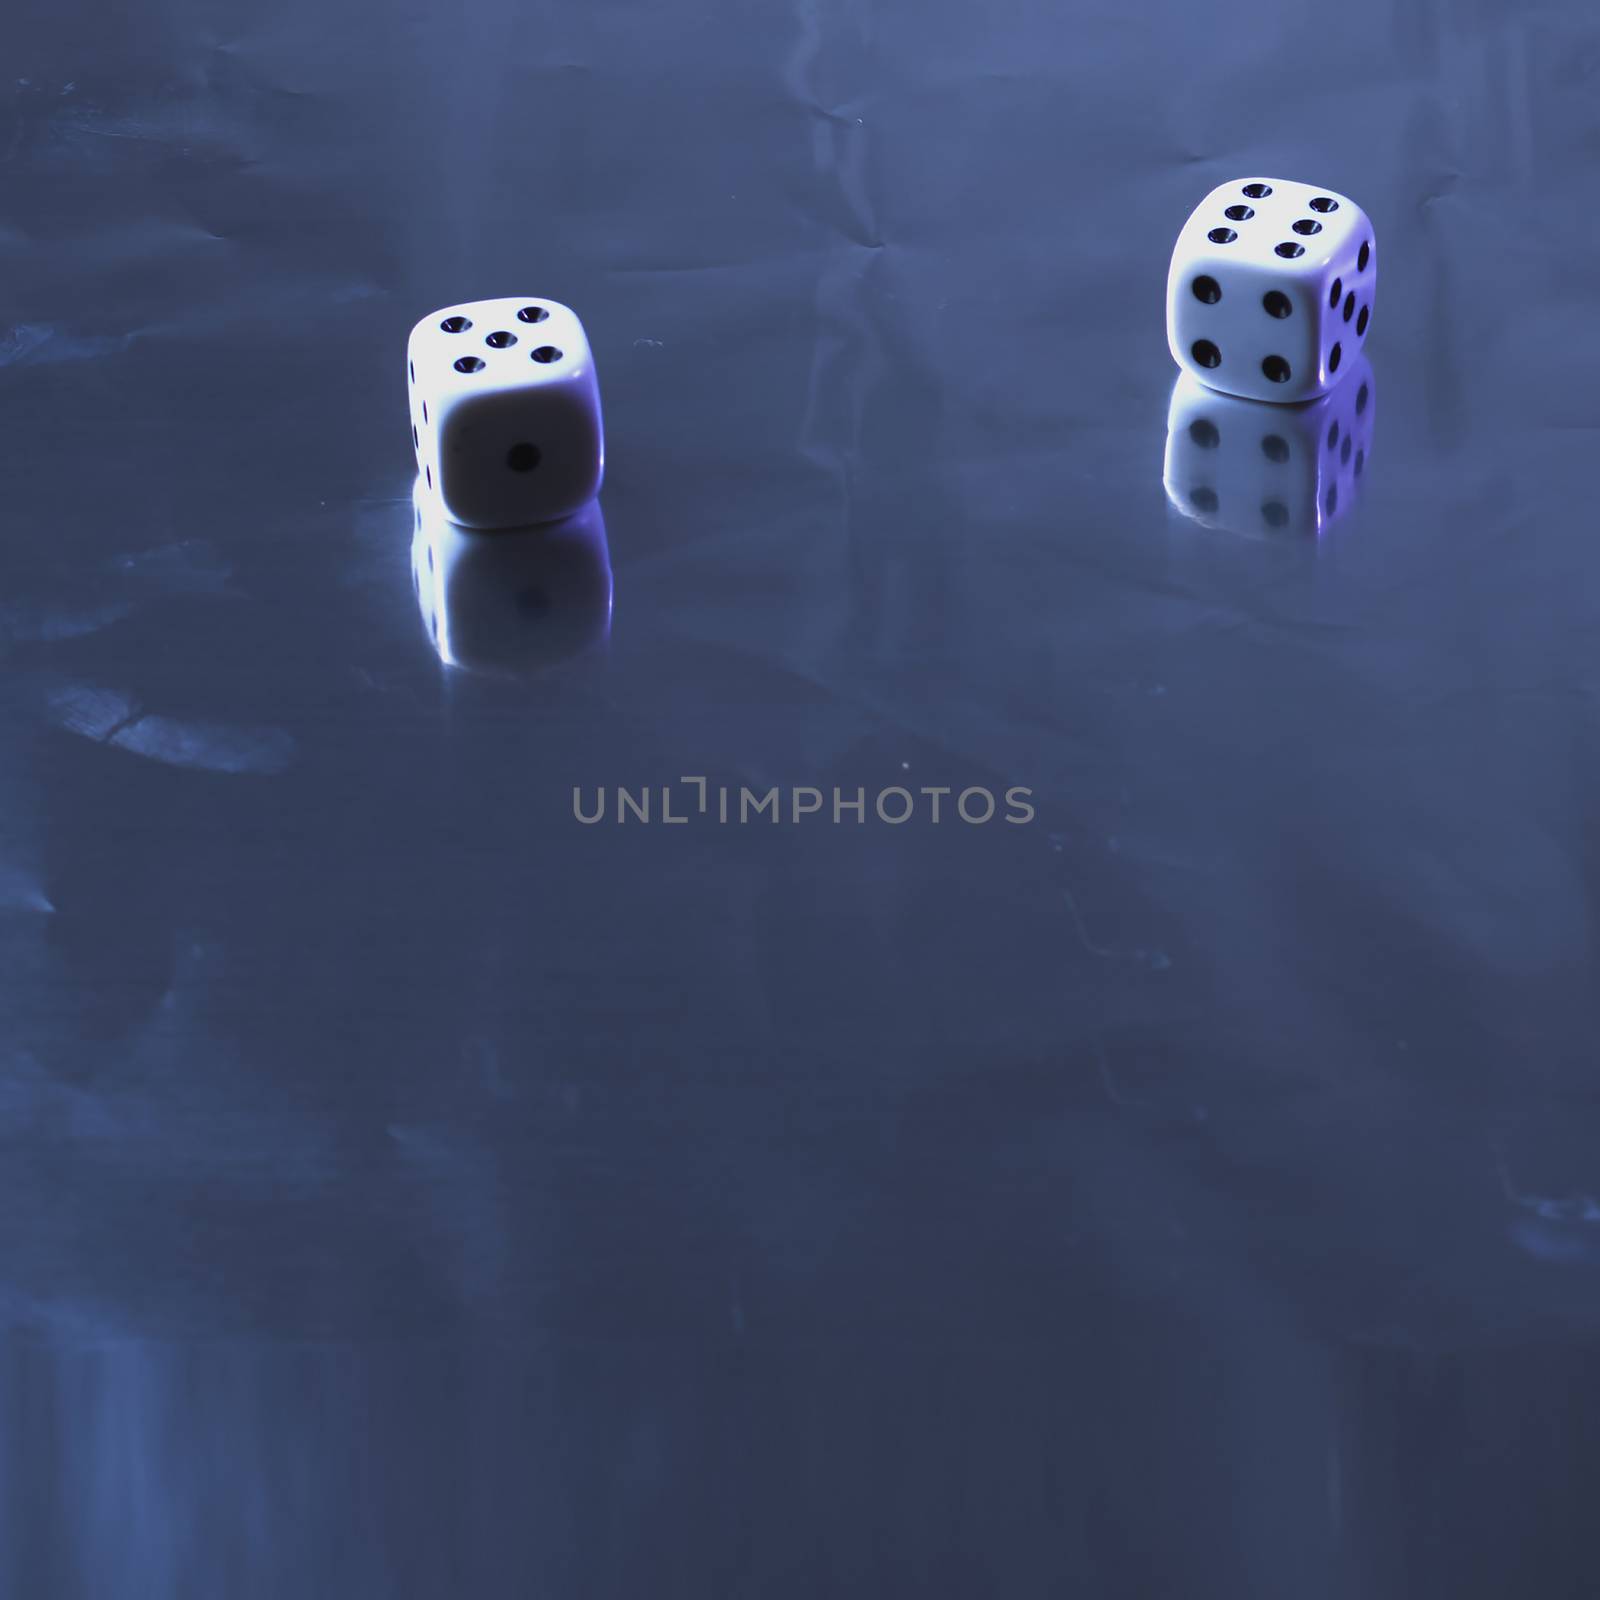 Two dice on silver background, by raul_ruiz